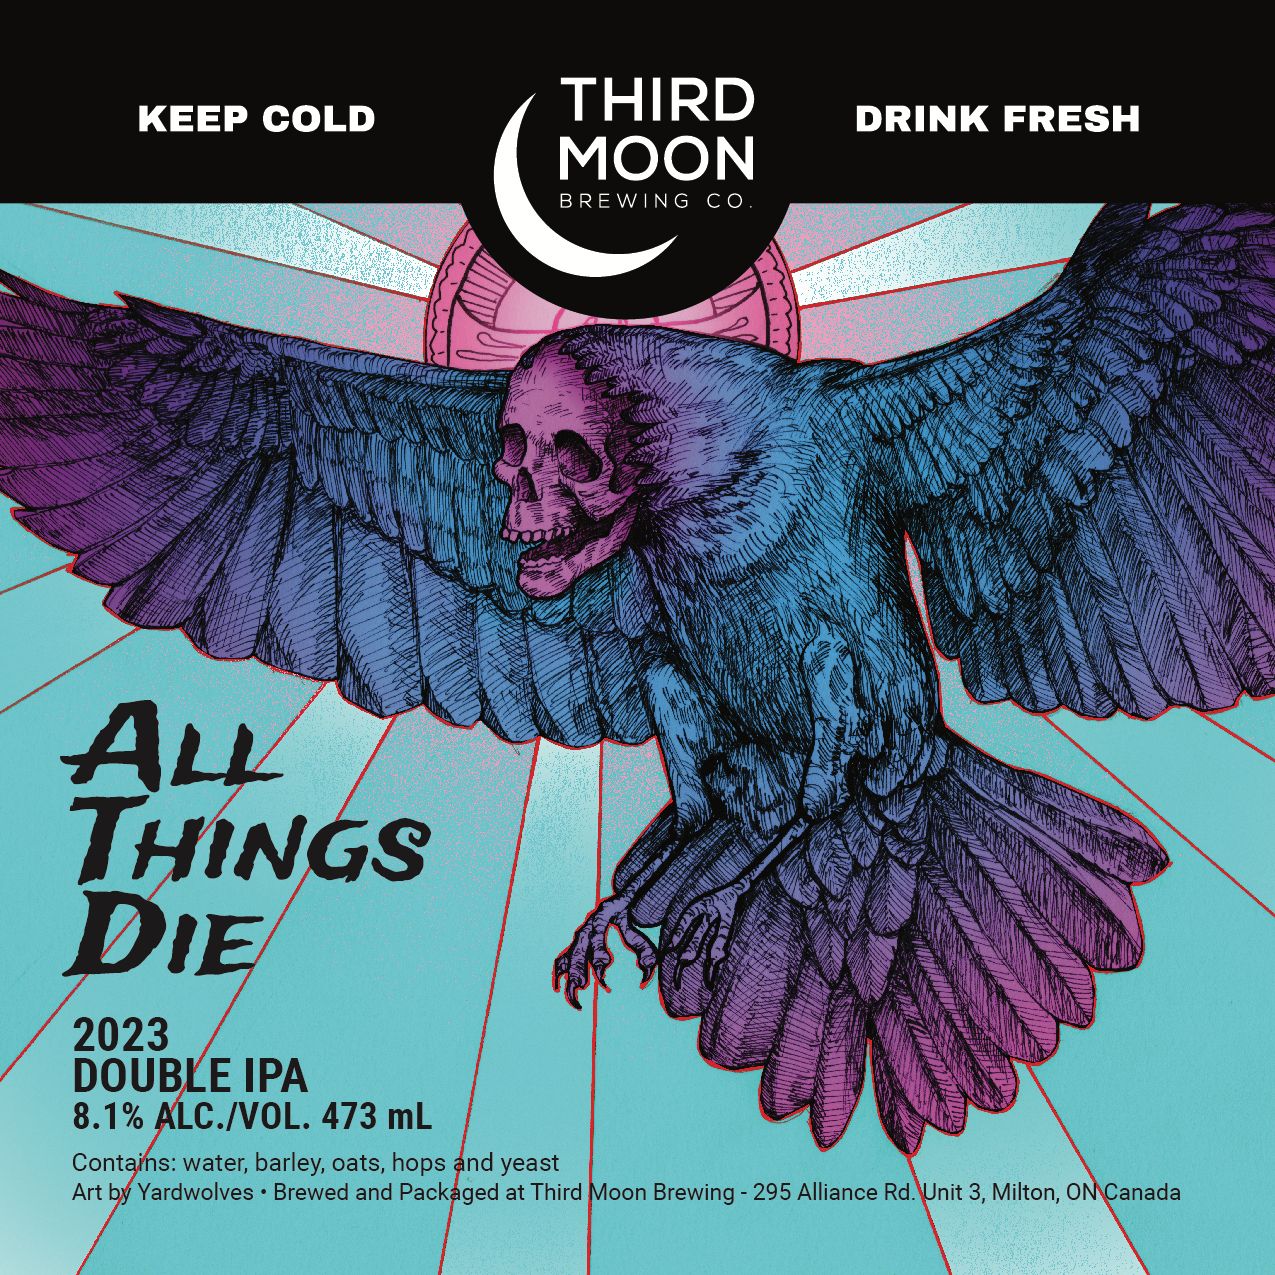 Double IPA - 4-pk of "All Things Die" tall cans